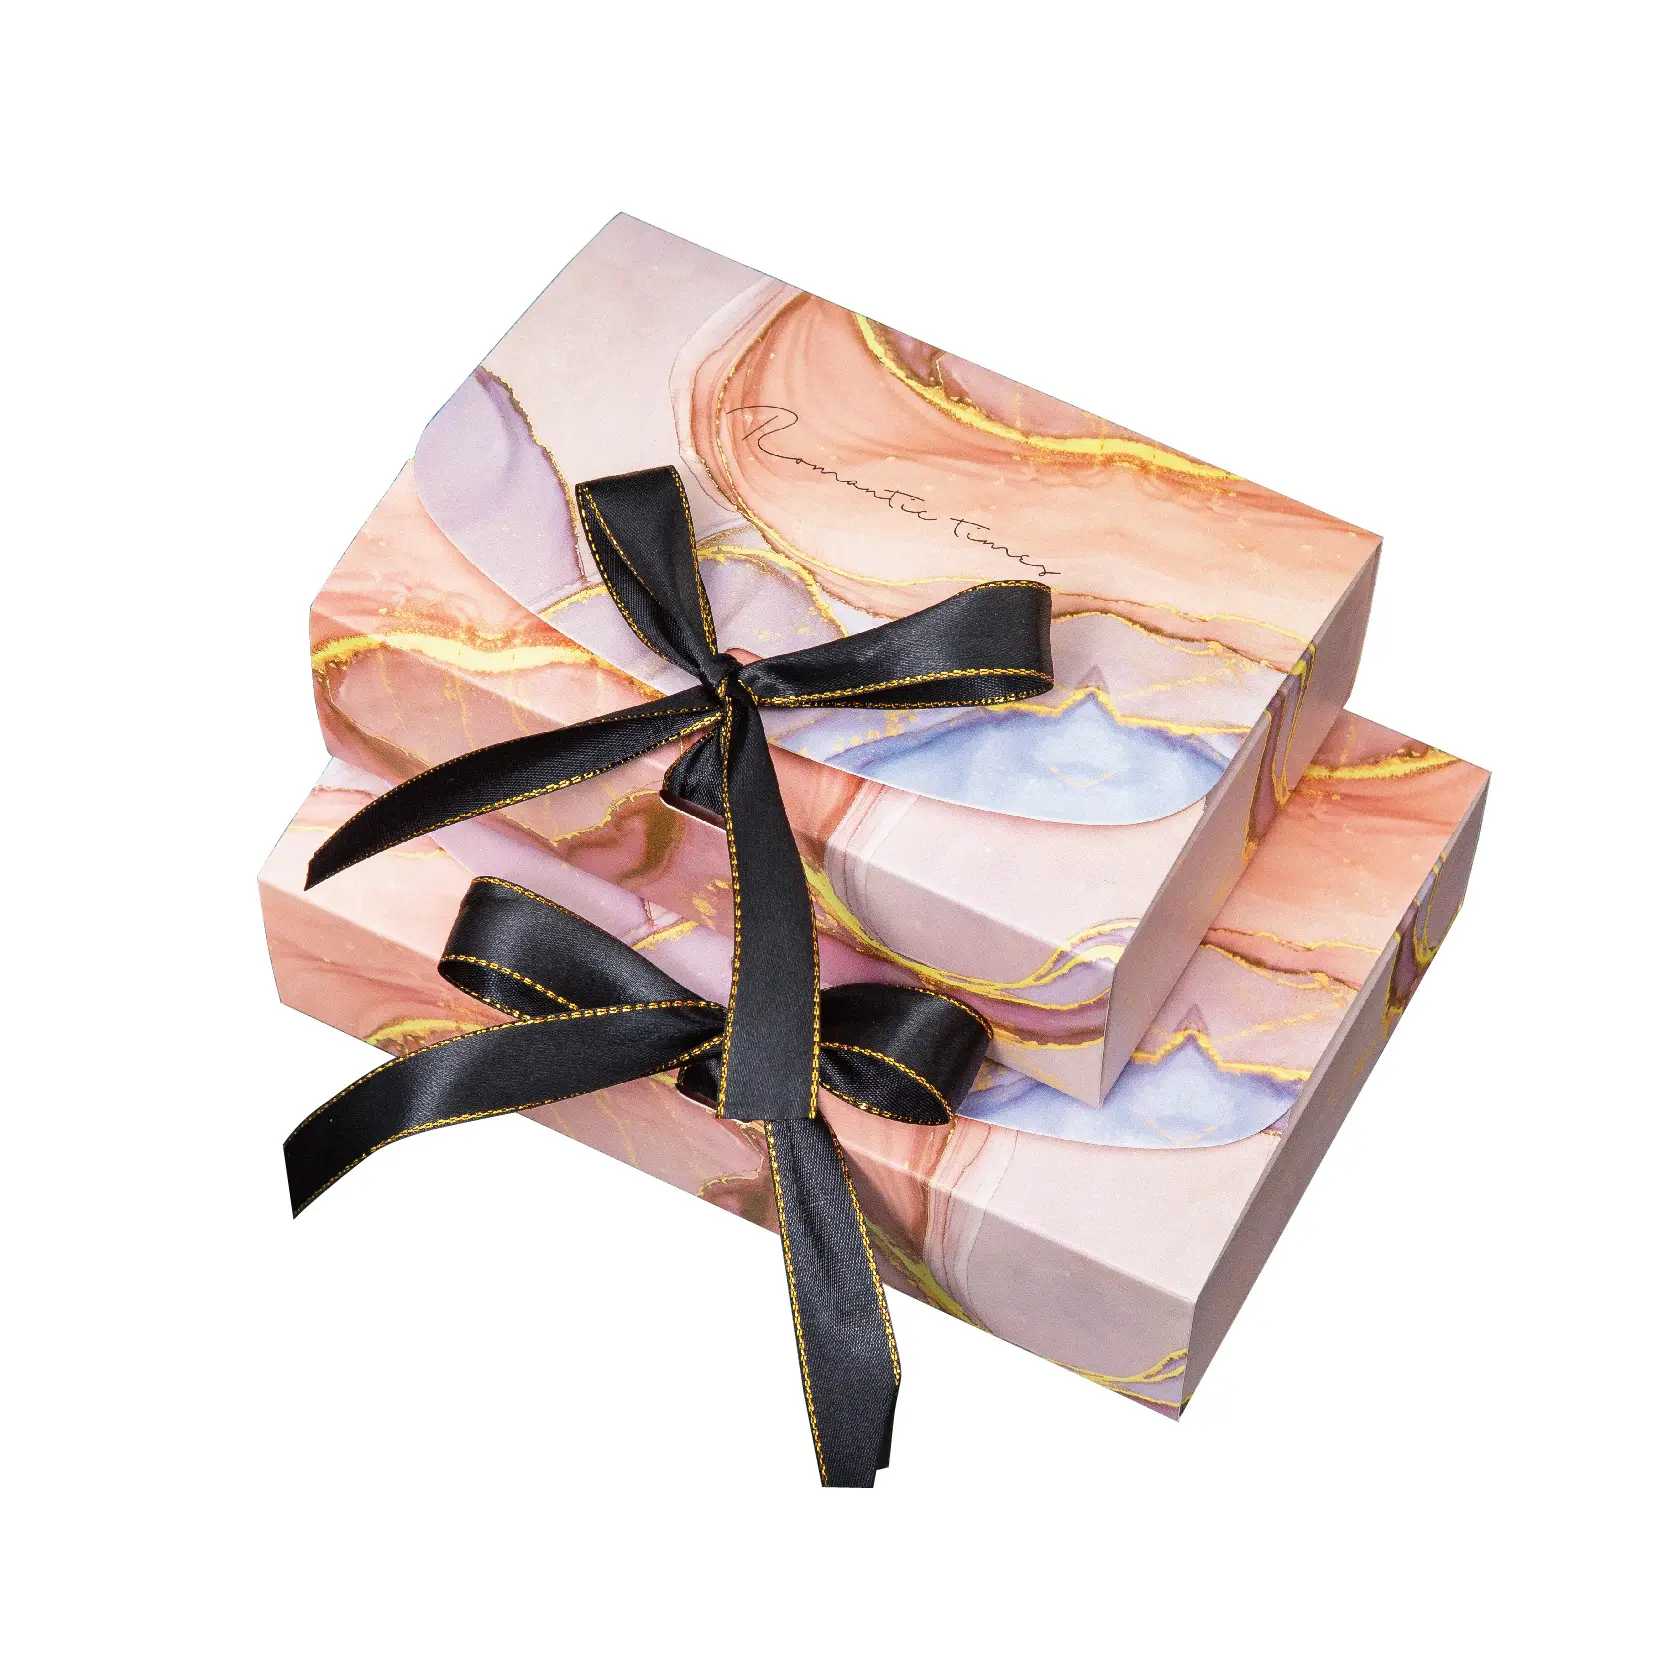 Scarf Box Bra Underwear Socks Packaging Paperboard Box Marble Gift Box Perfect For Birthday Business